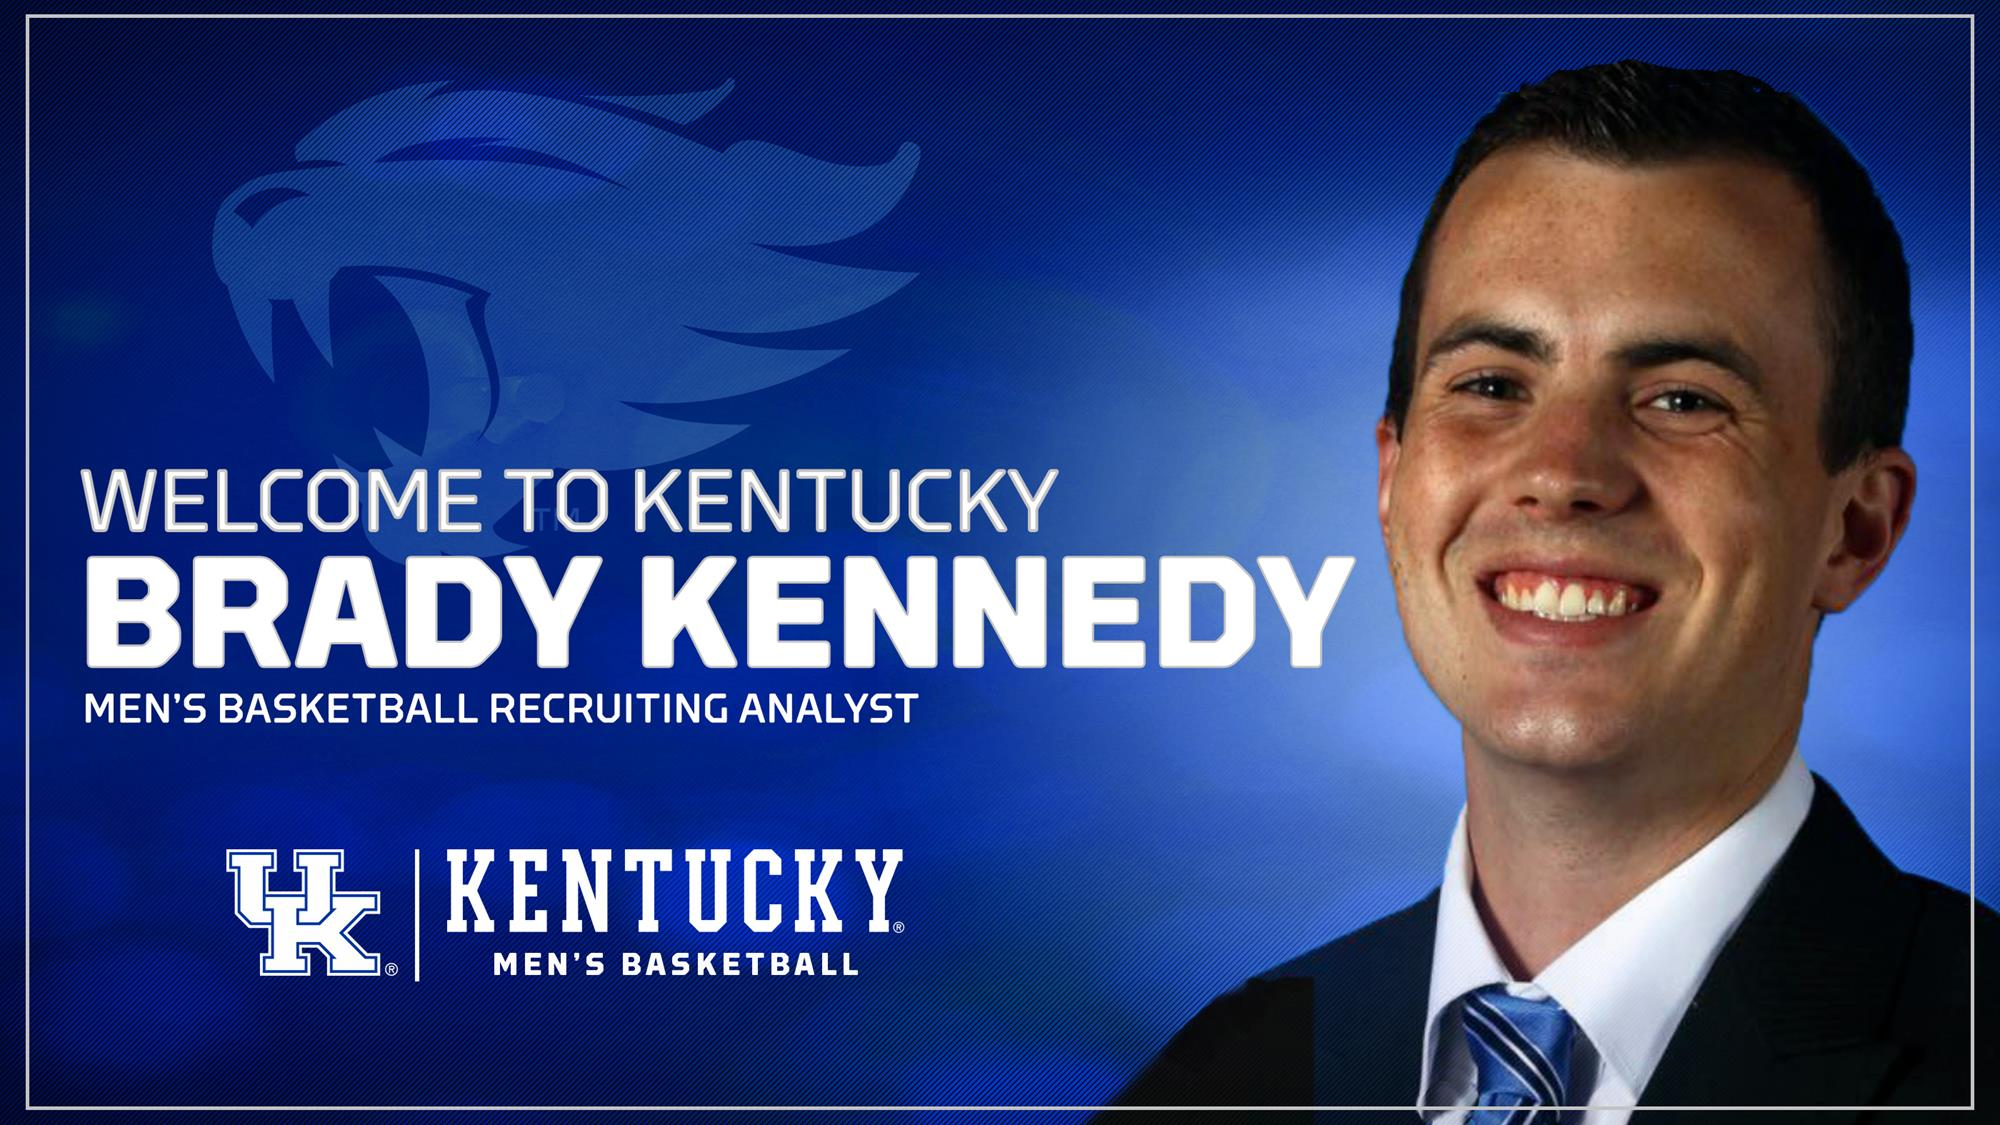 Kennedy Joins UK Men’s Basketball Staff as Recruiting Analyst